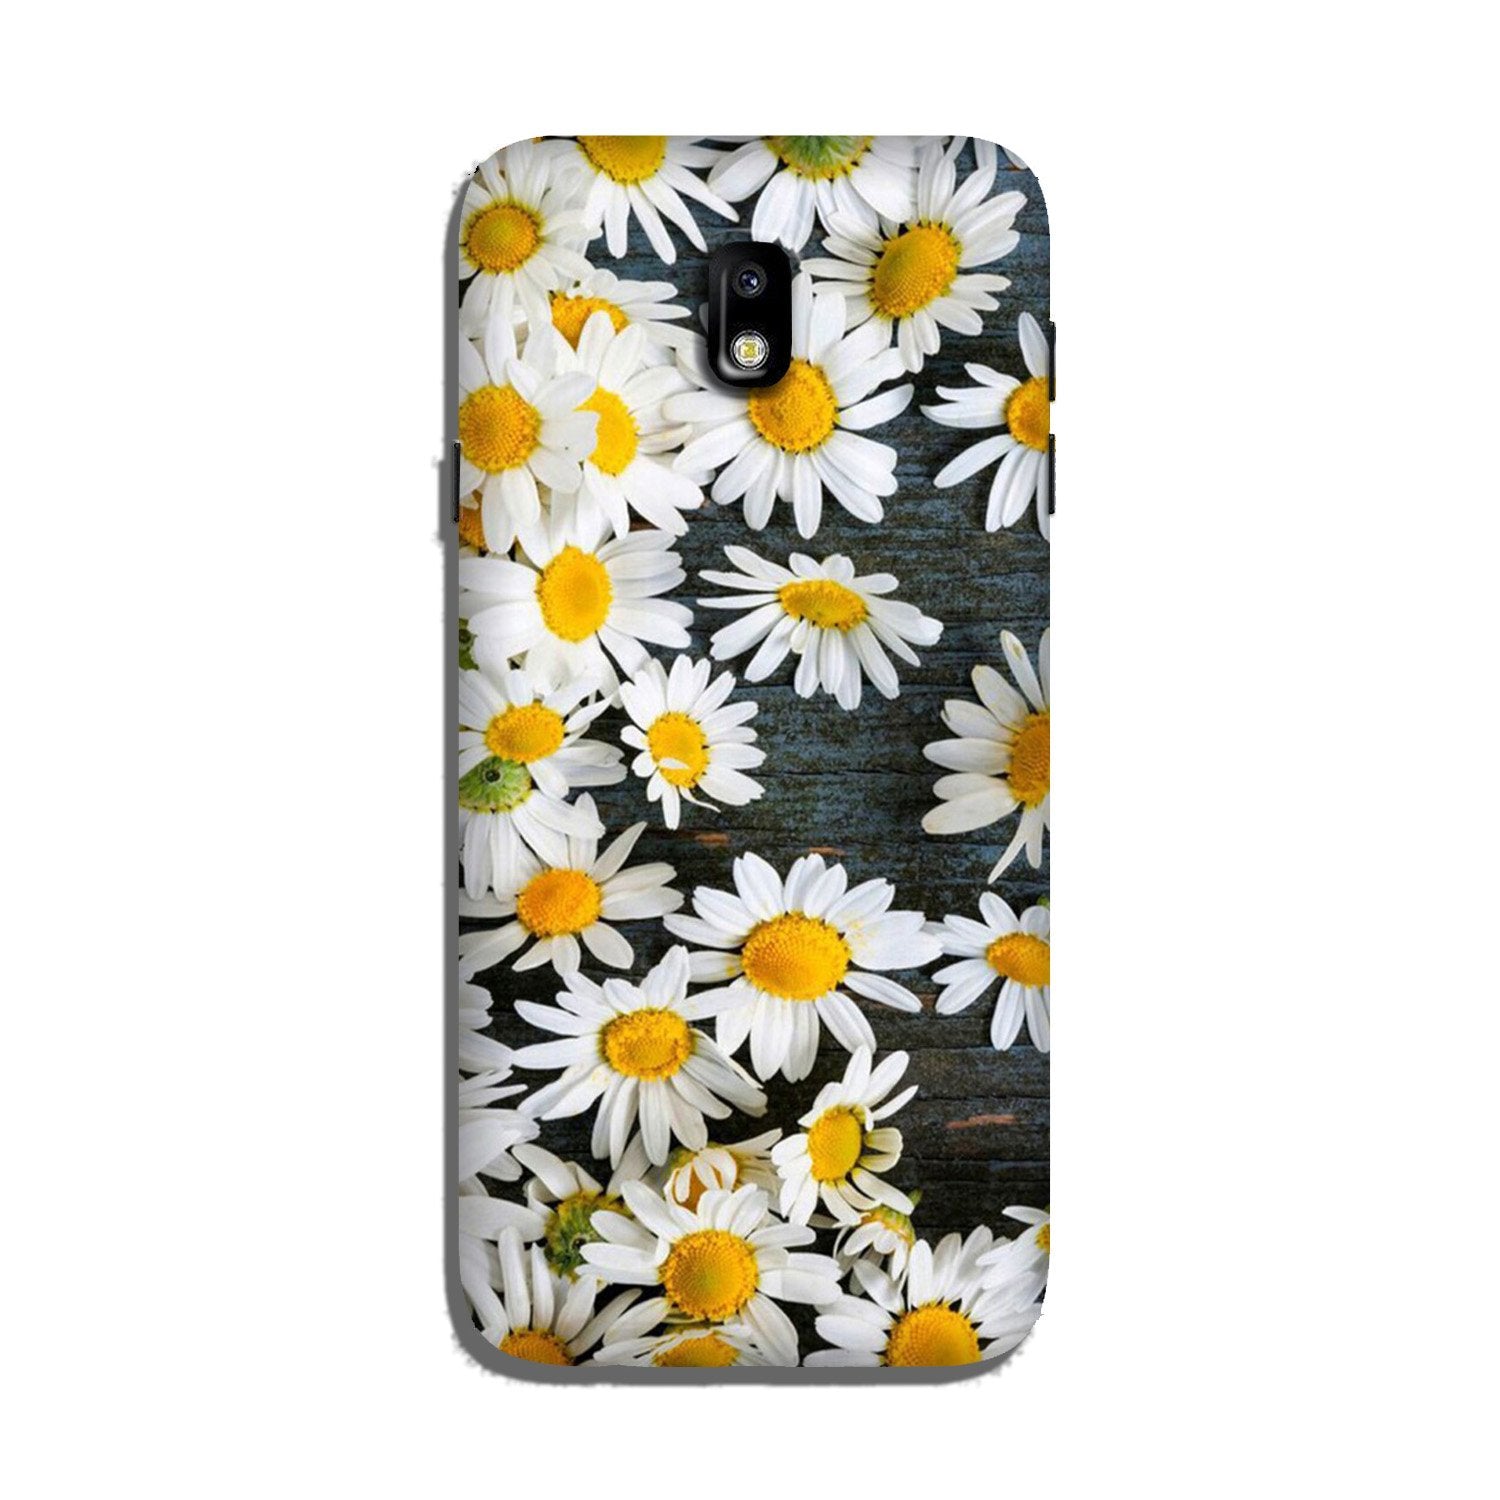 White flowers2 Case for Galaxy J5 Pro